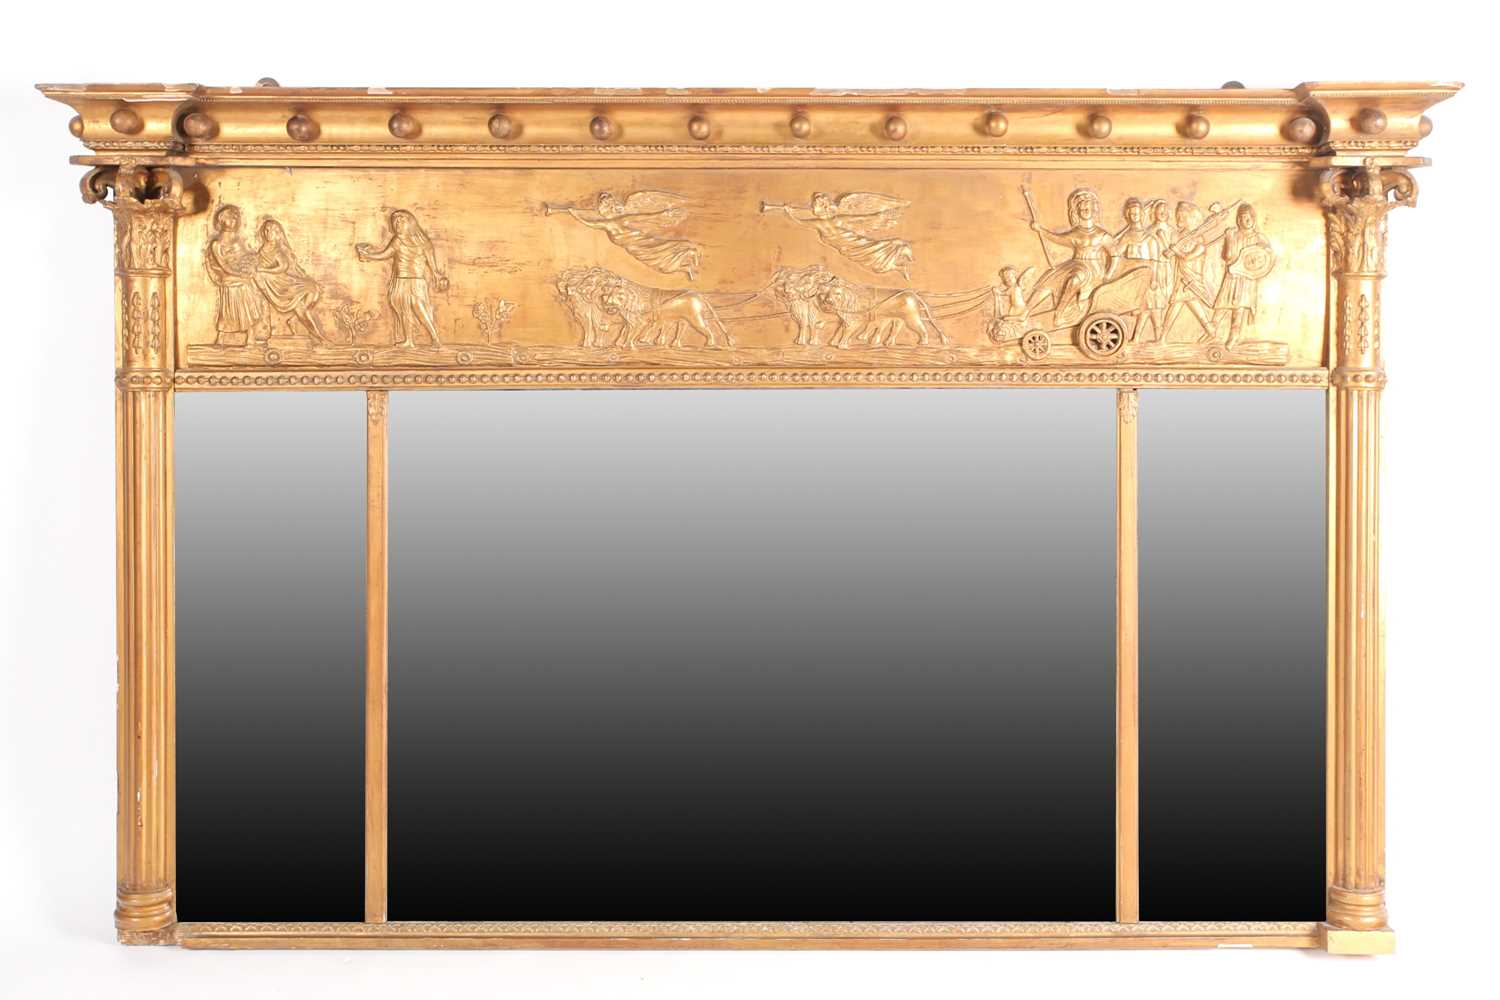 A Regency giltwood overmantle three-panel mirror, with relief decoration to the frieze, between